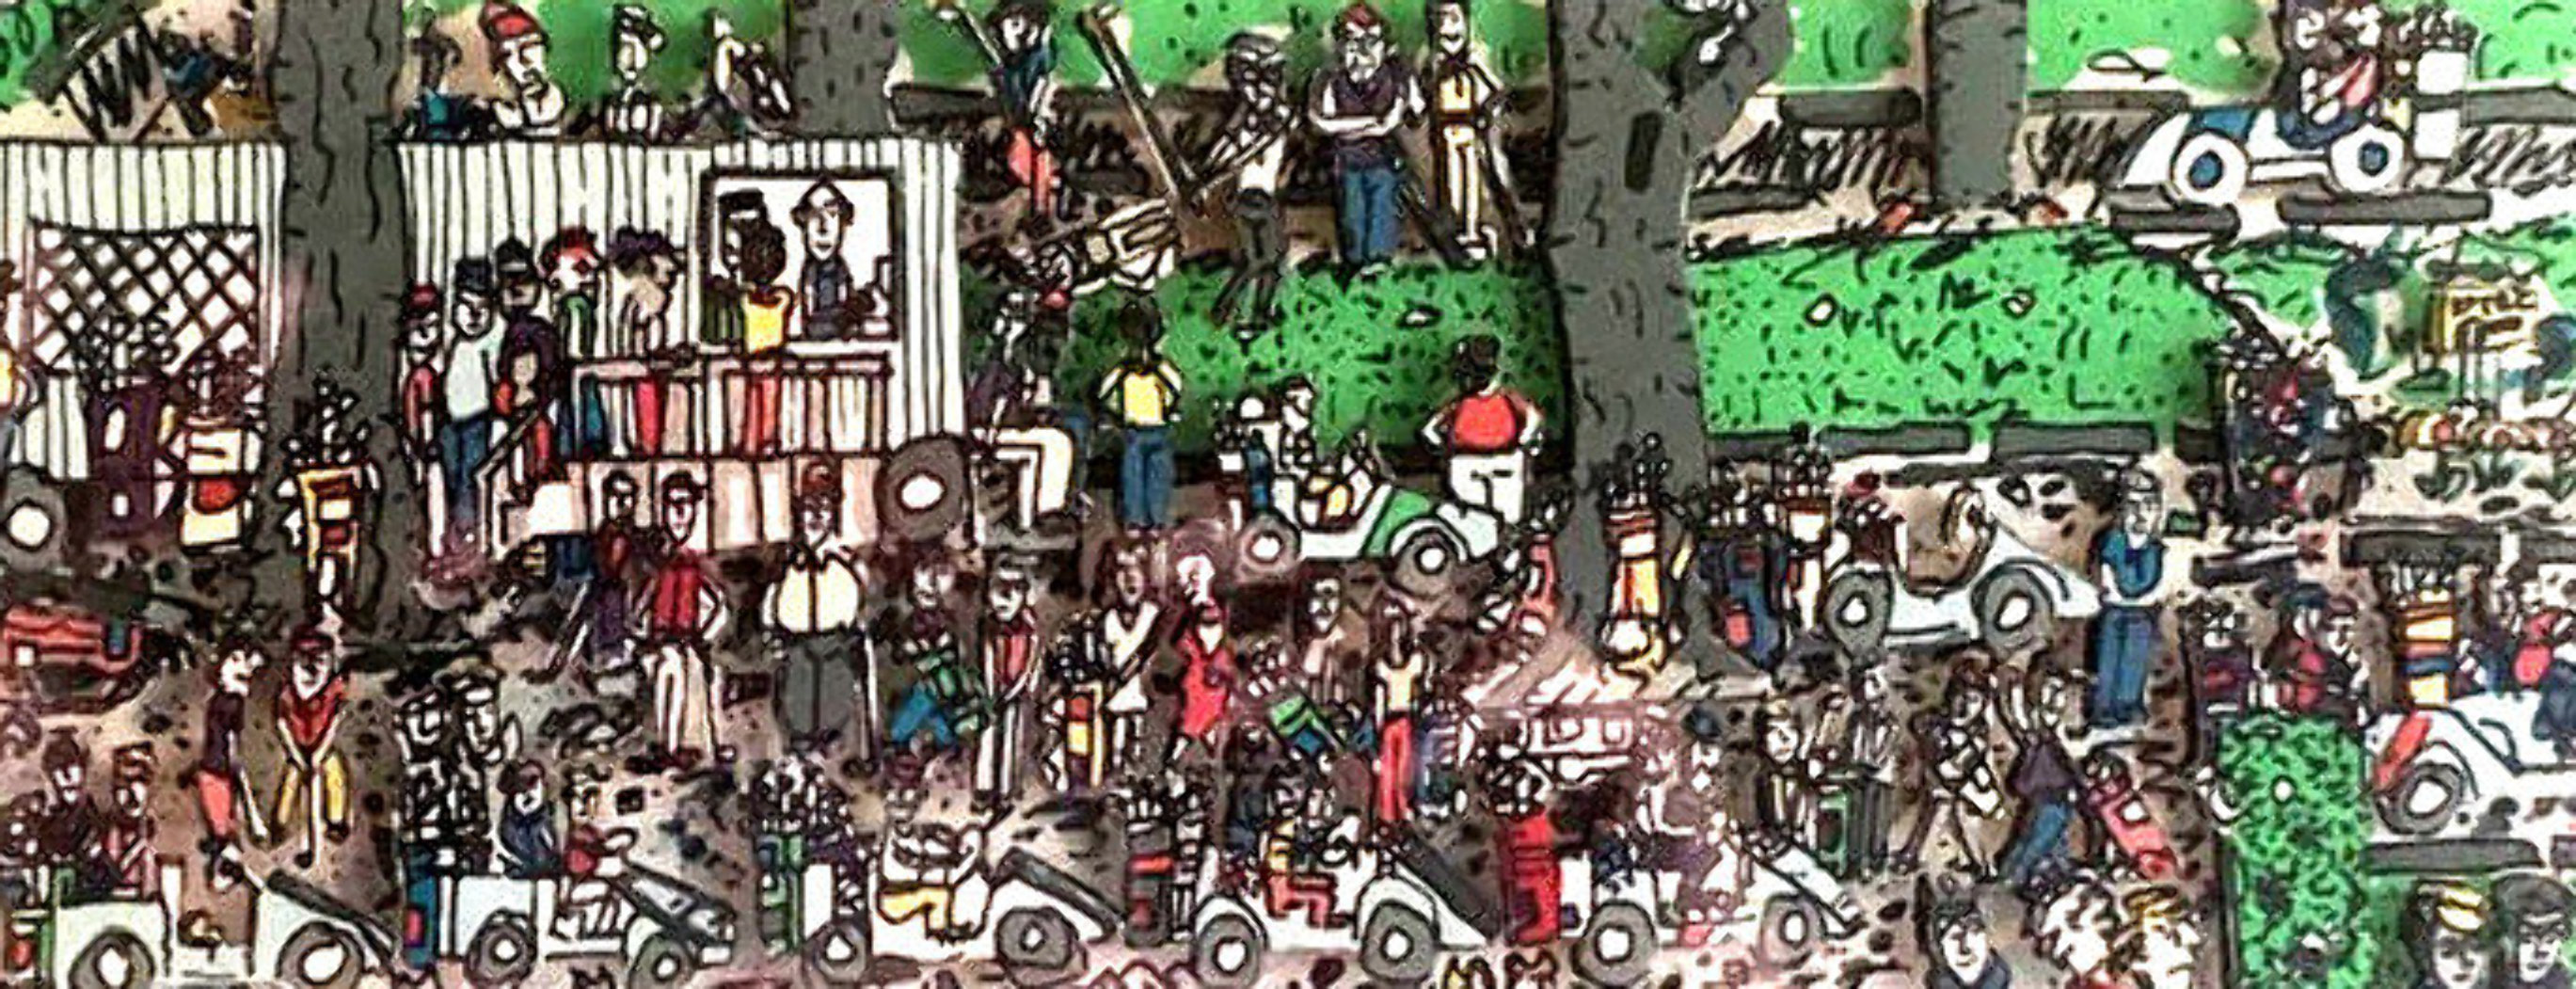 Waiting to Play Golf 3-D 1989 Limited Edition Print by James Rizzi